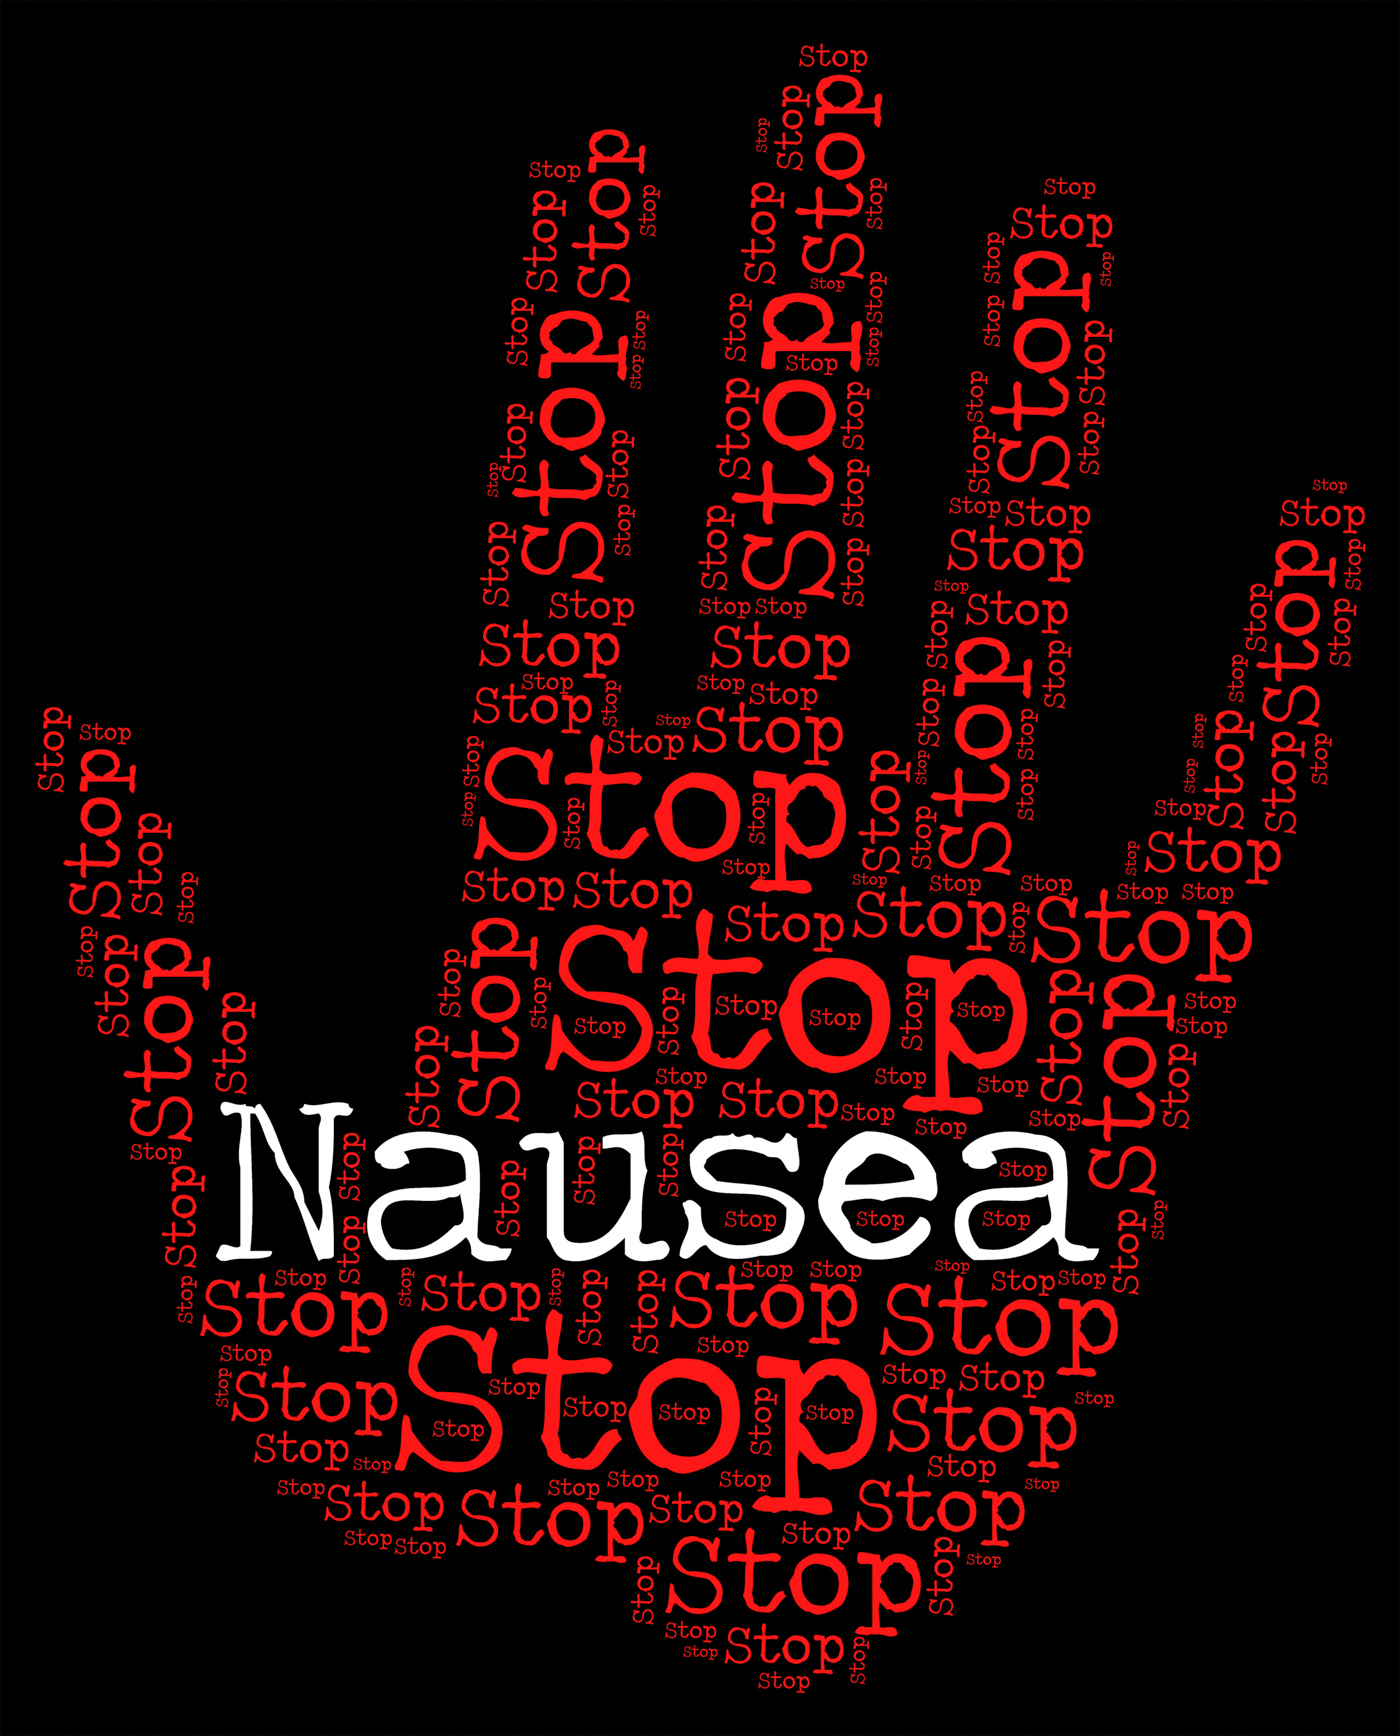 Stop nausea means travel sickness and no photo